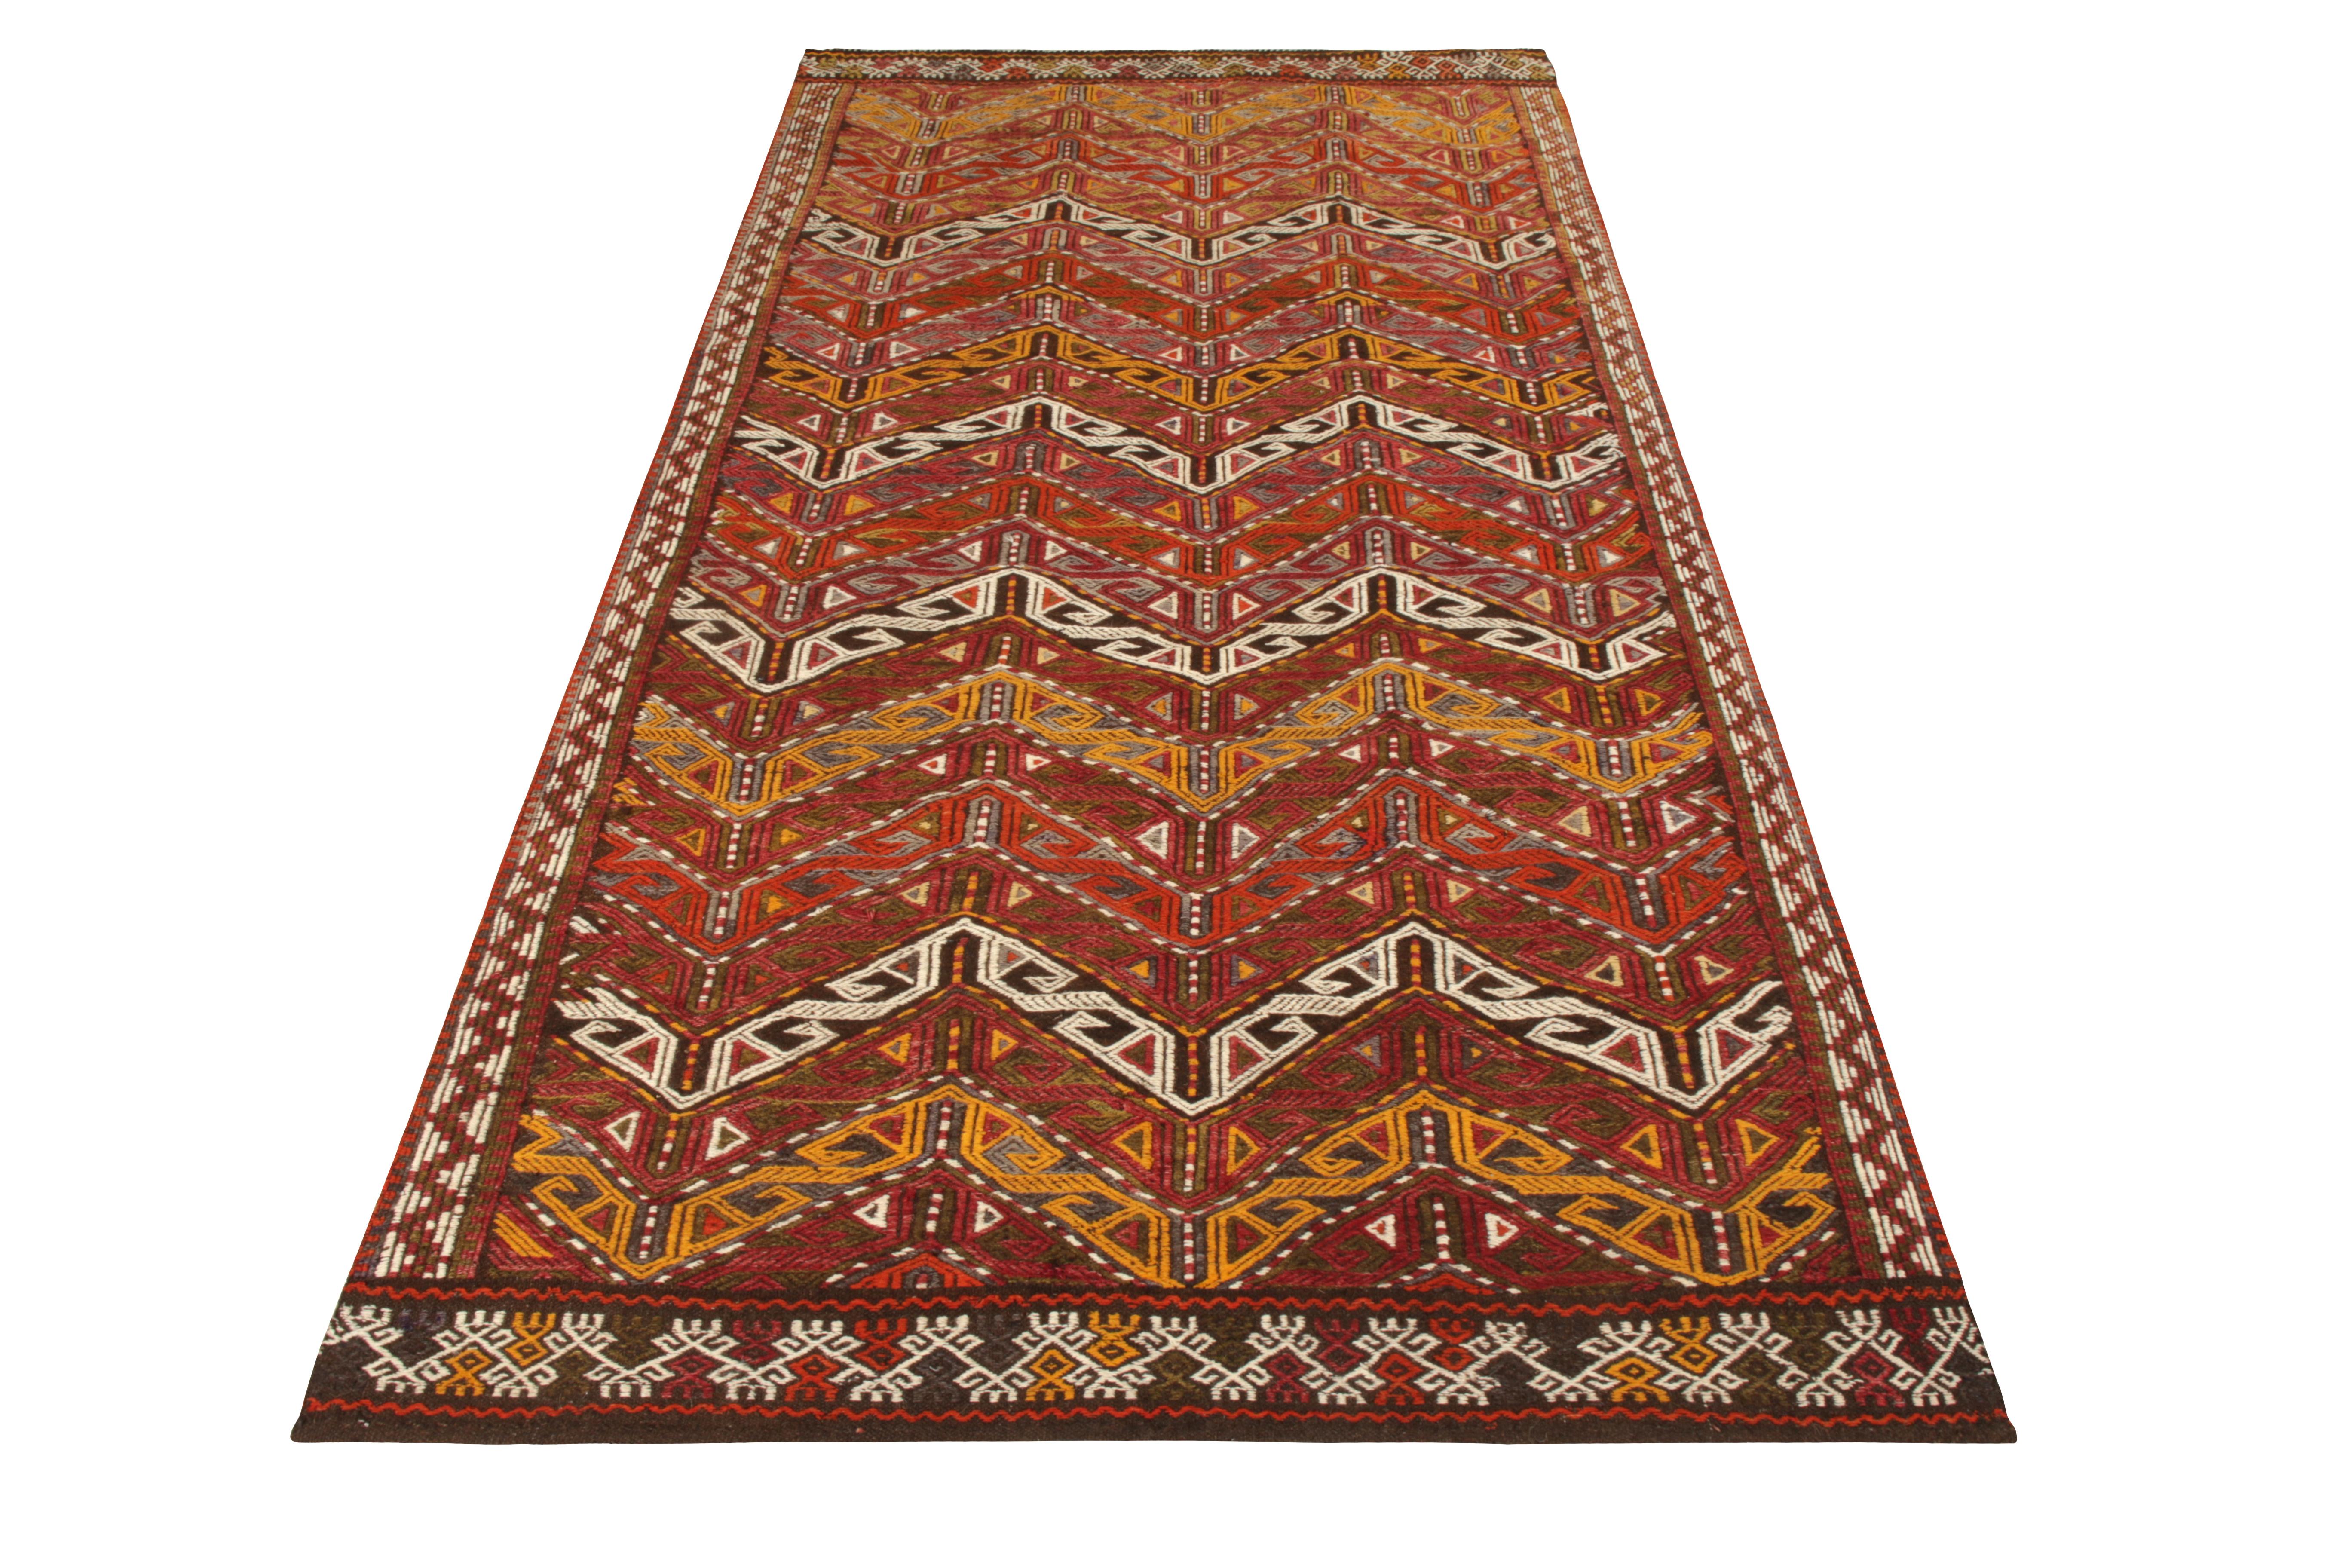 Handwoven in wool, a 5x9 Kilim rug available in Rug & Kilim’s prized collection. A delicious take on geometric design, the rug enjoys an illusion created by repetition of a well defined chevron pattern supporting a variety of other patterns on both